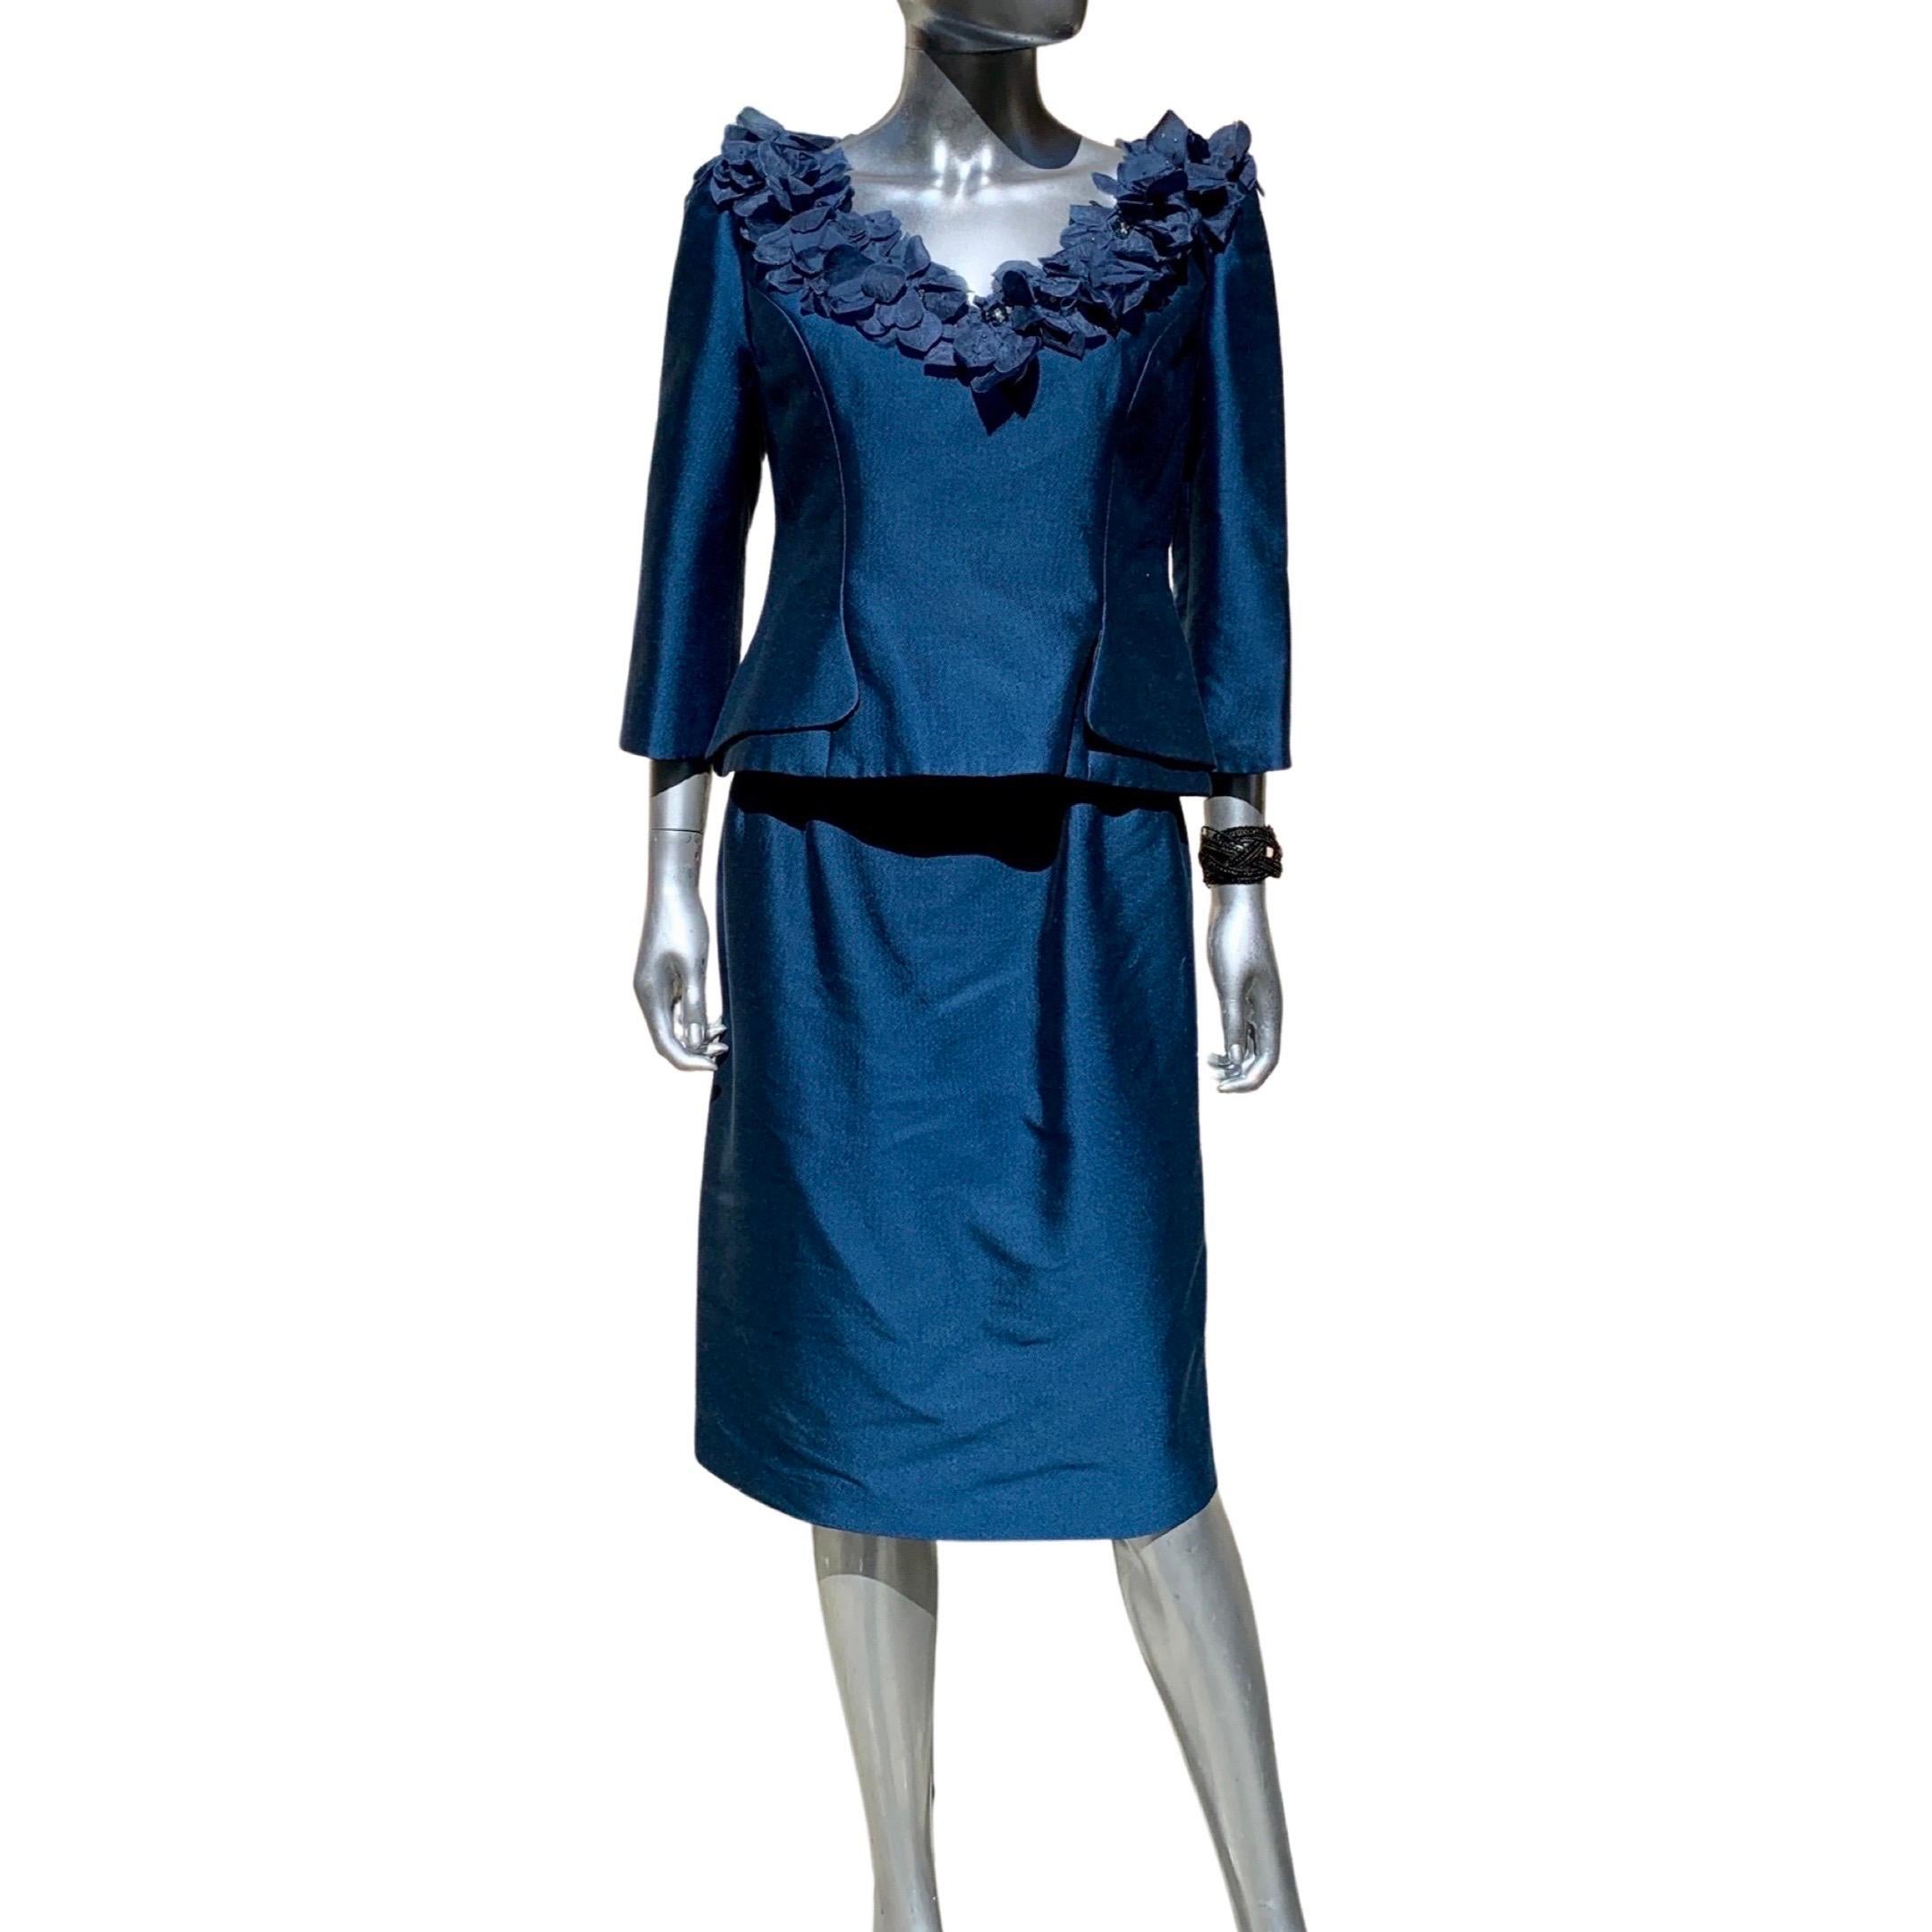 Three Piece Saphire Blue Couture Evening Ensemble by Lily Samii SF Size 8 For Sale 1